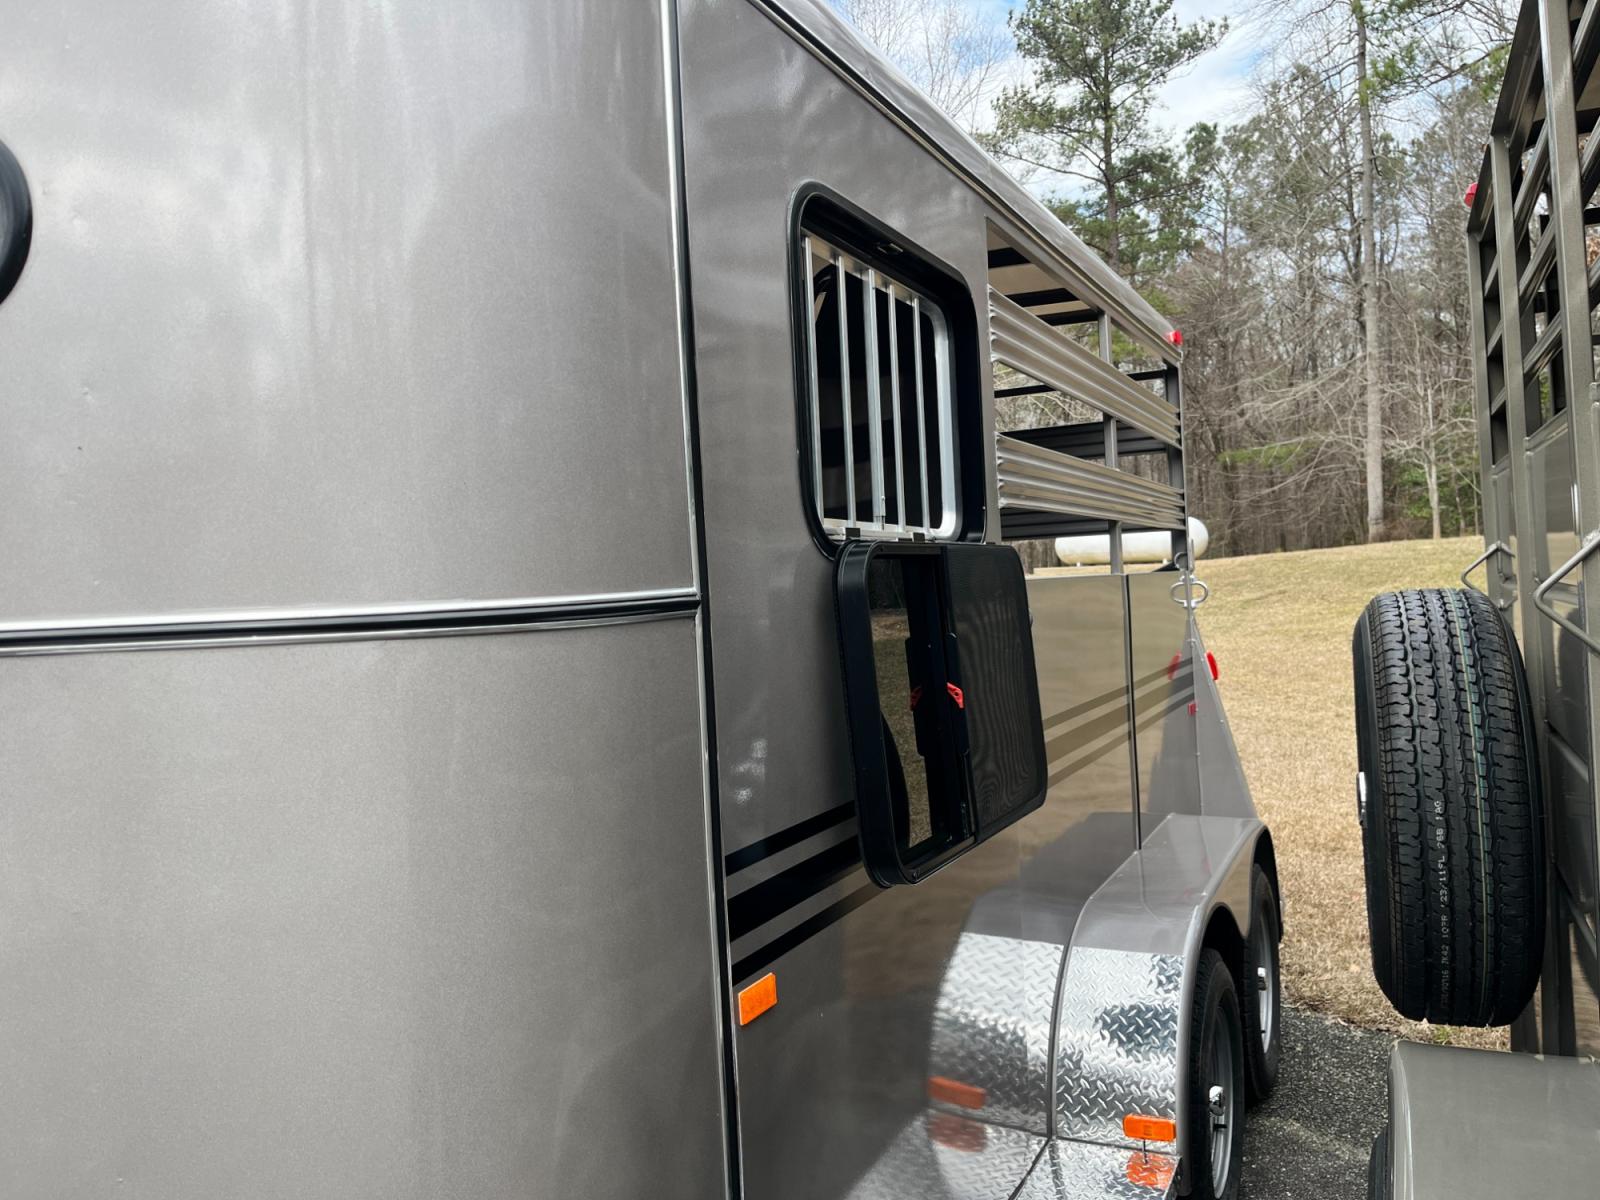 2023 Arizona Beige Bee Trailers 2 Horse Slant Durango , located at 1330 Rainey Rd., Macon, 31220, (478) 960-1044, 32.845638, -83.778687 - Brand New Model 2 Horse Slant Trailer, made by Bee Trailers in South Georgia! This is the Deluxe Durango Model Trailer, with Drop Down Window! 6ft Wide X 13ft Long Deluxe Model Tandem Axle Trailer! This is Built Using Galvanneal Coated Sheetmetal Steel! Double Lined Butt Wall, Allows for a Slam - Photo #2